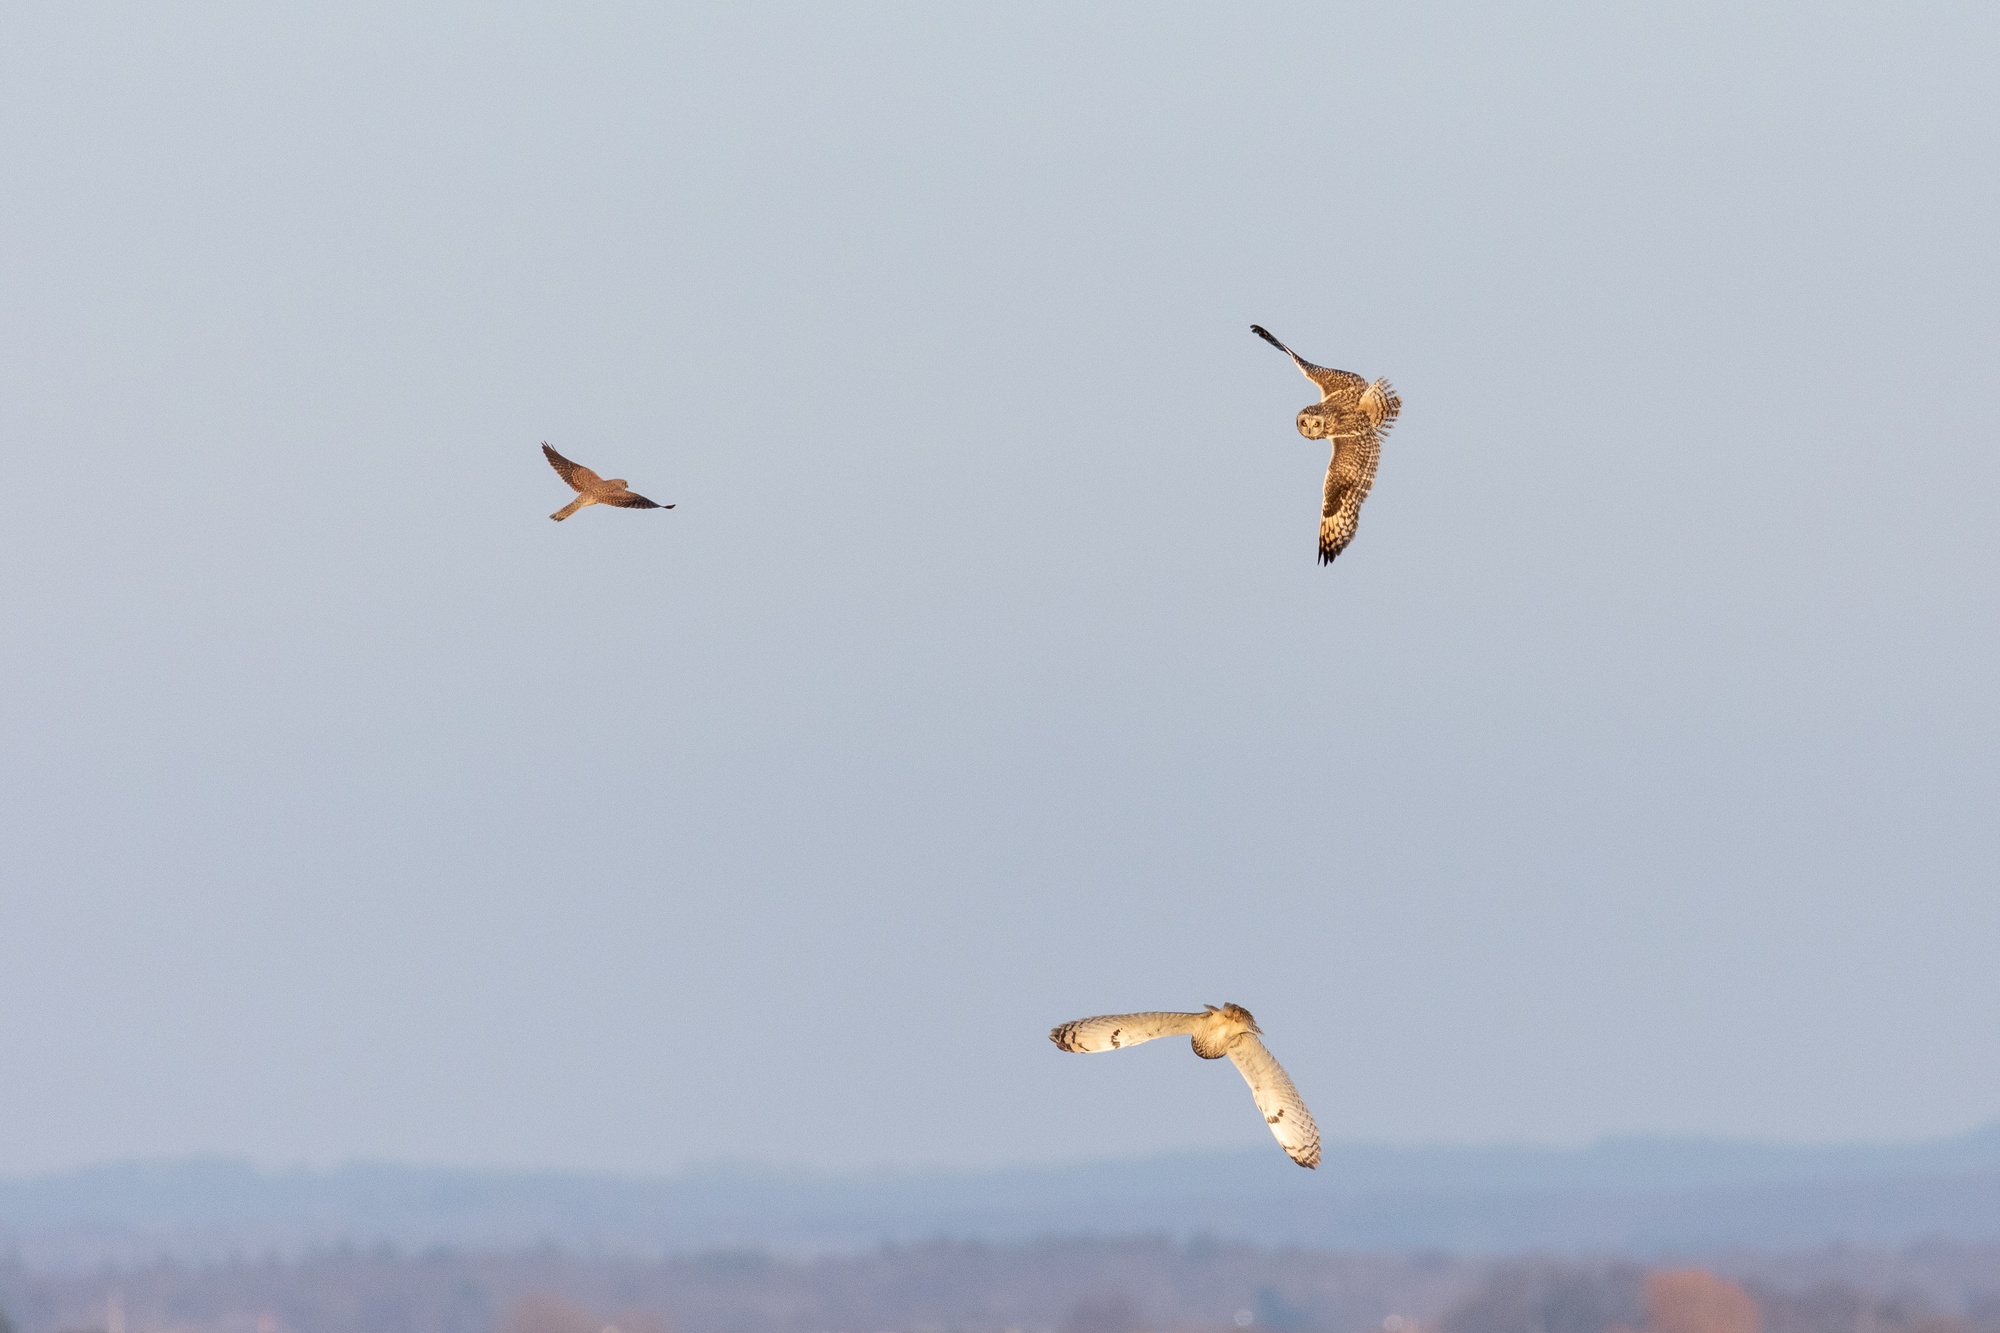 There are 2 short-eared owls and a kestrel. The birds are arragened in a triganle shape with the kestrel and a owl along the top edge and a single owl at the bottom between the two. The kestrel is flying up and away from the camera, looking away from both owls. The top owl is mid-turn, it's body is horizontal with its back towards the camera. The body is pointing towards the kestrel. It's wings are spread with the lower one flat to the camera. It's head is facing towards the other owl. The second owl is flying down and away from the camera. It's wings are in a downwards v shape with the full underside of the wing facing the camera. The birds appear close to 2 meters appart. In the backgound is a blue sky and some blurred hills in the lower part of the frame.